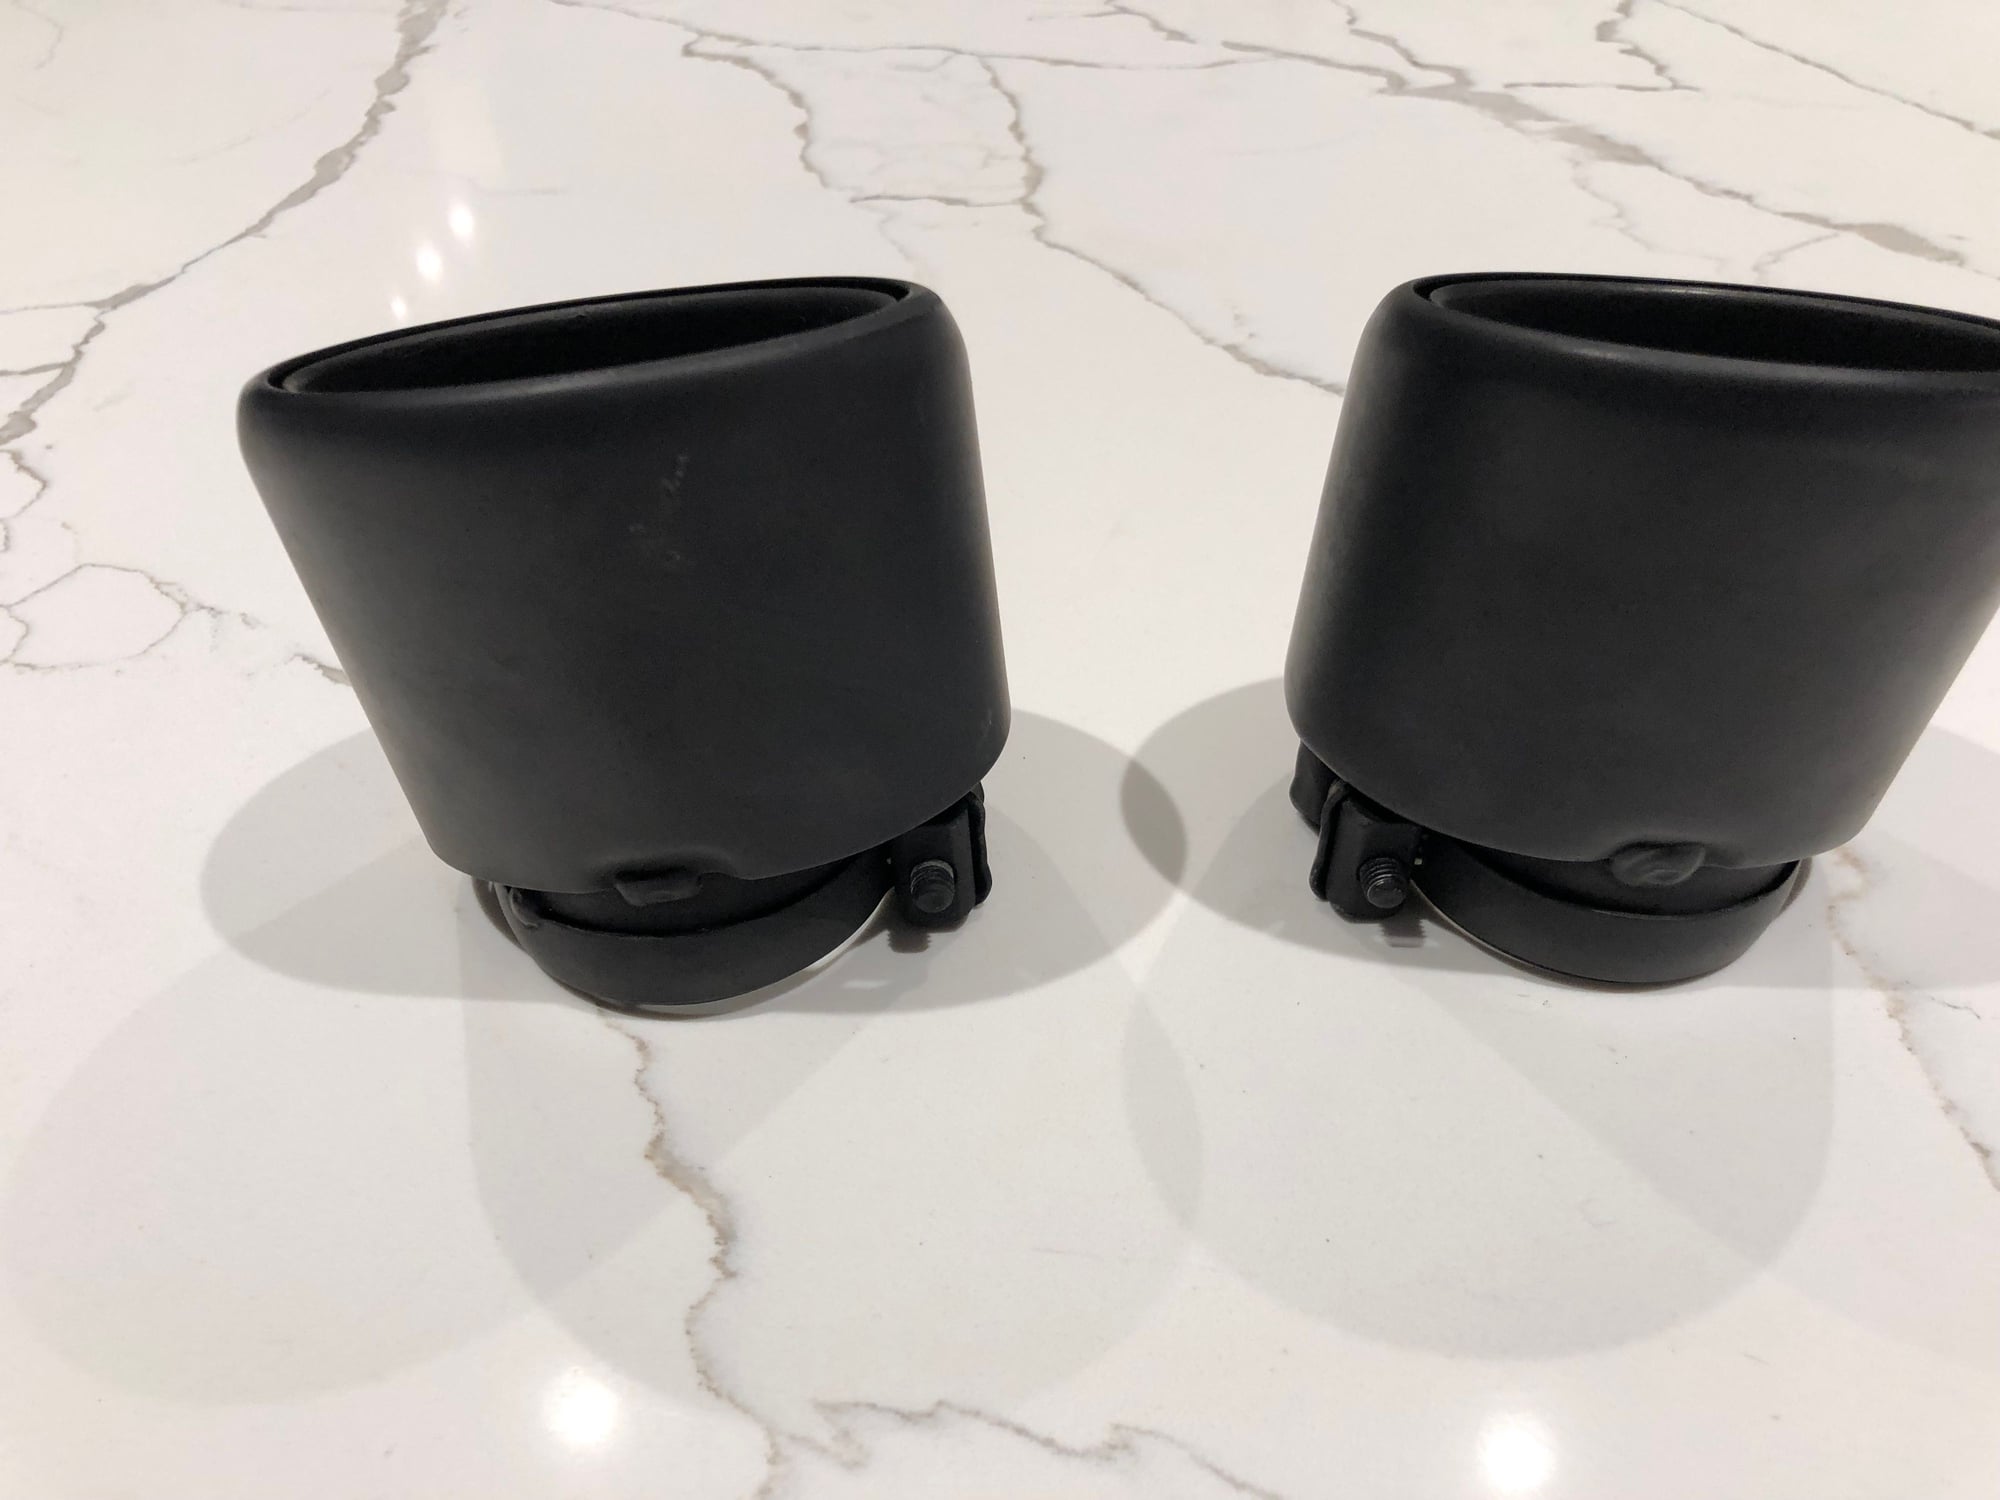 Engine - Exhaust - OEM 991.2 PSE tips powder coated black - Used - 2017 to 2019 Porsche 911 - Inverness, IL 60067, United States